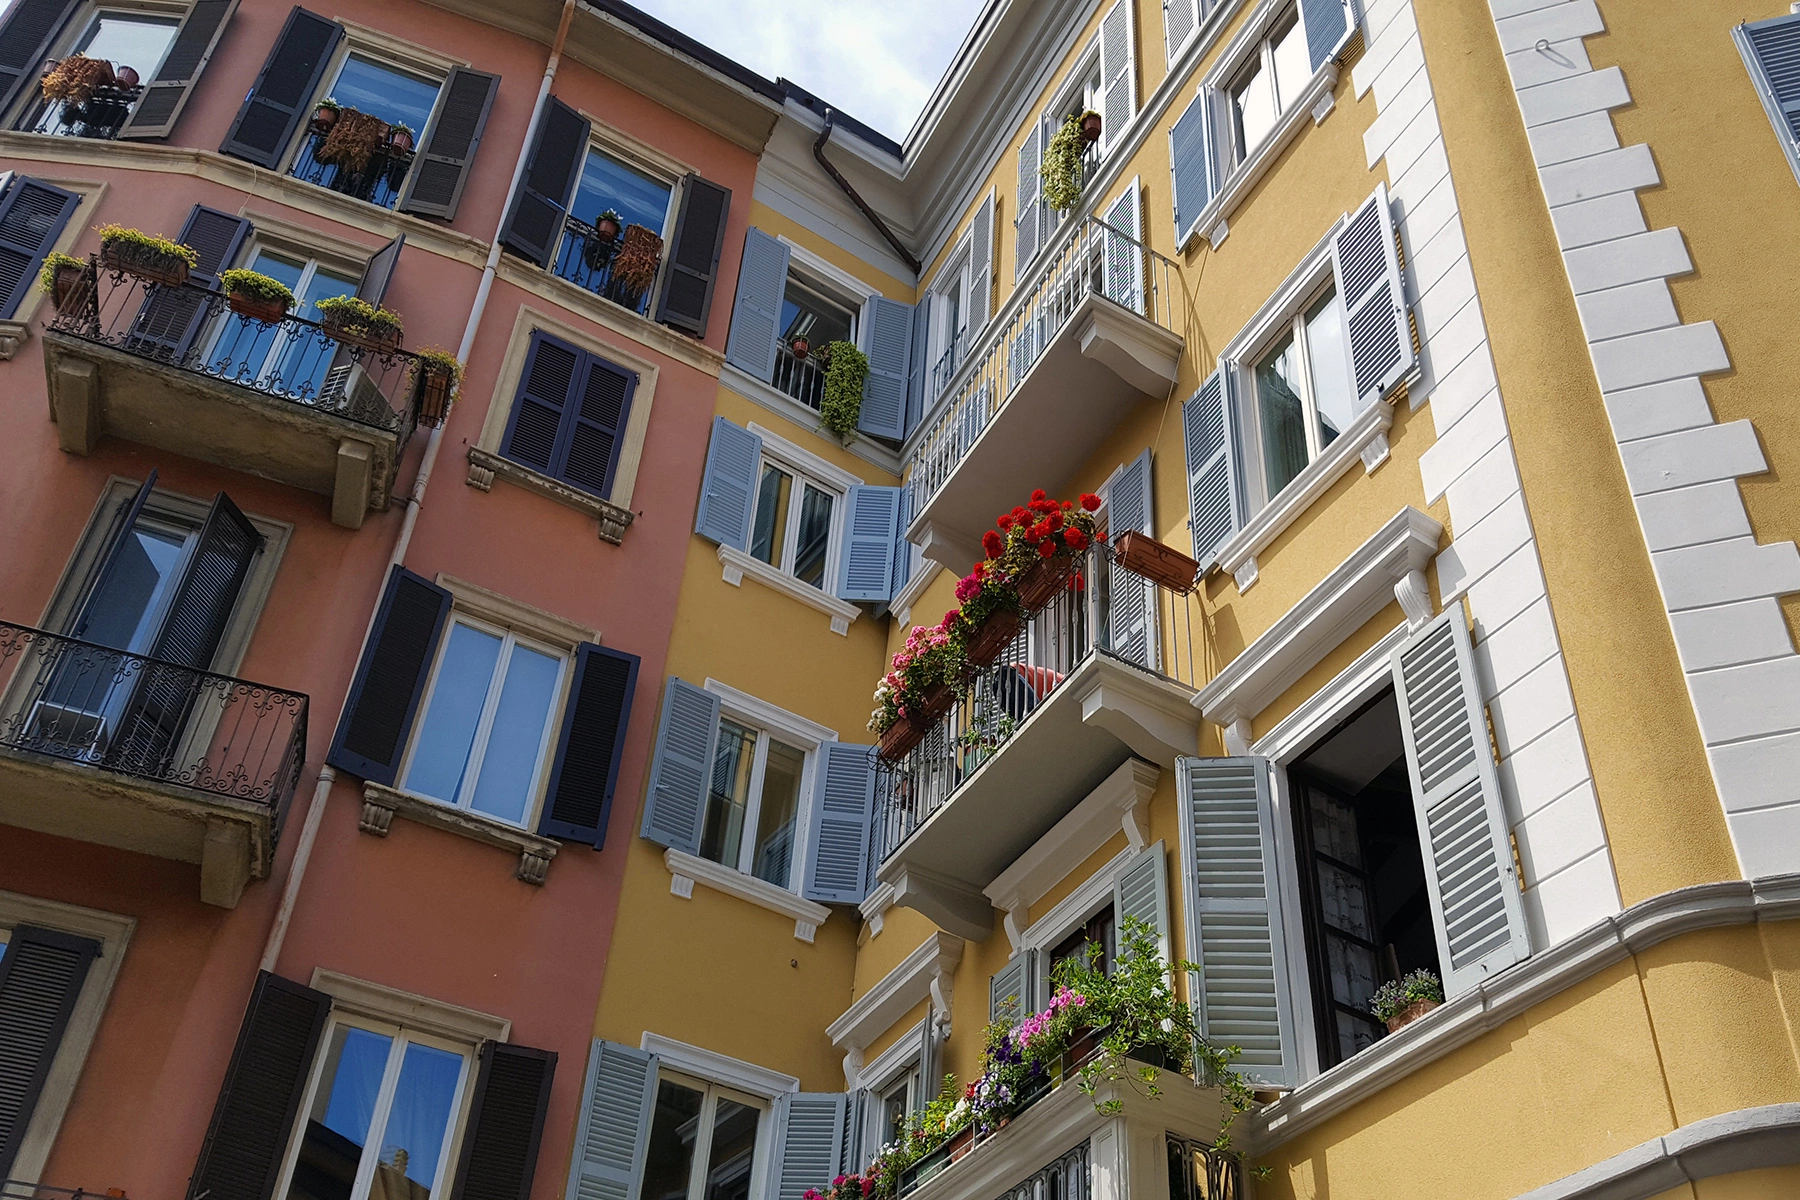 View from below of traditional residential buildings in the Brera district in Milan